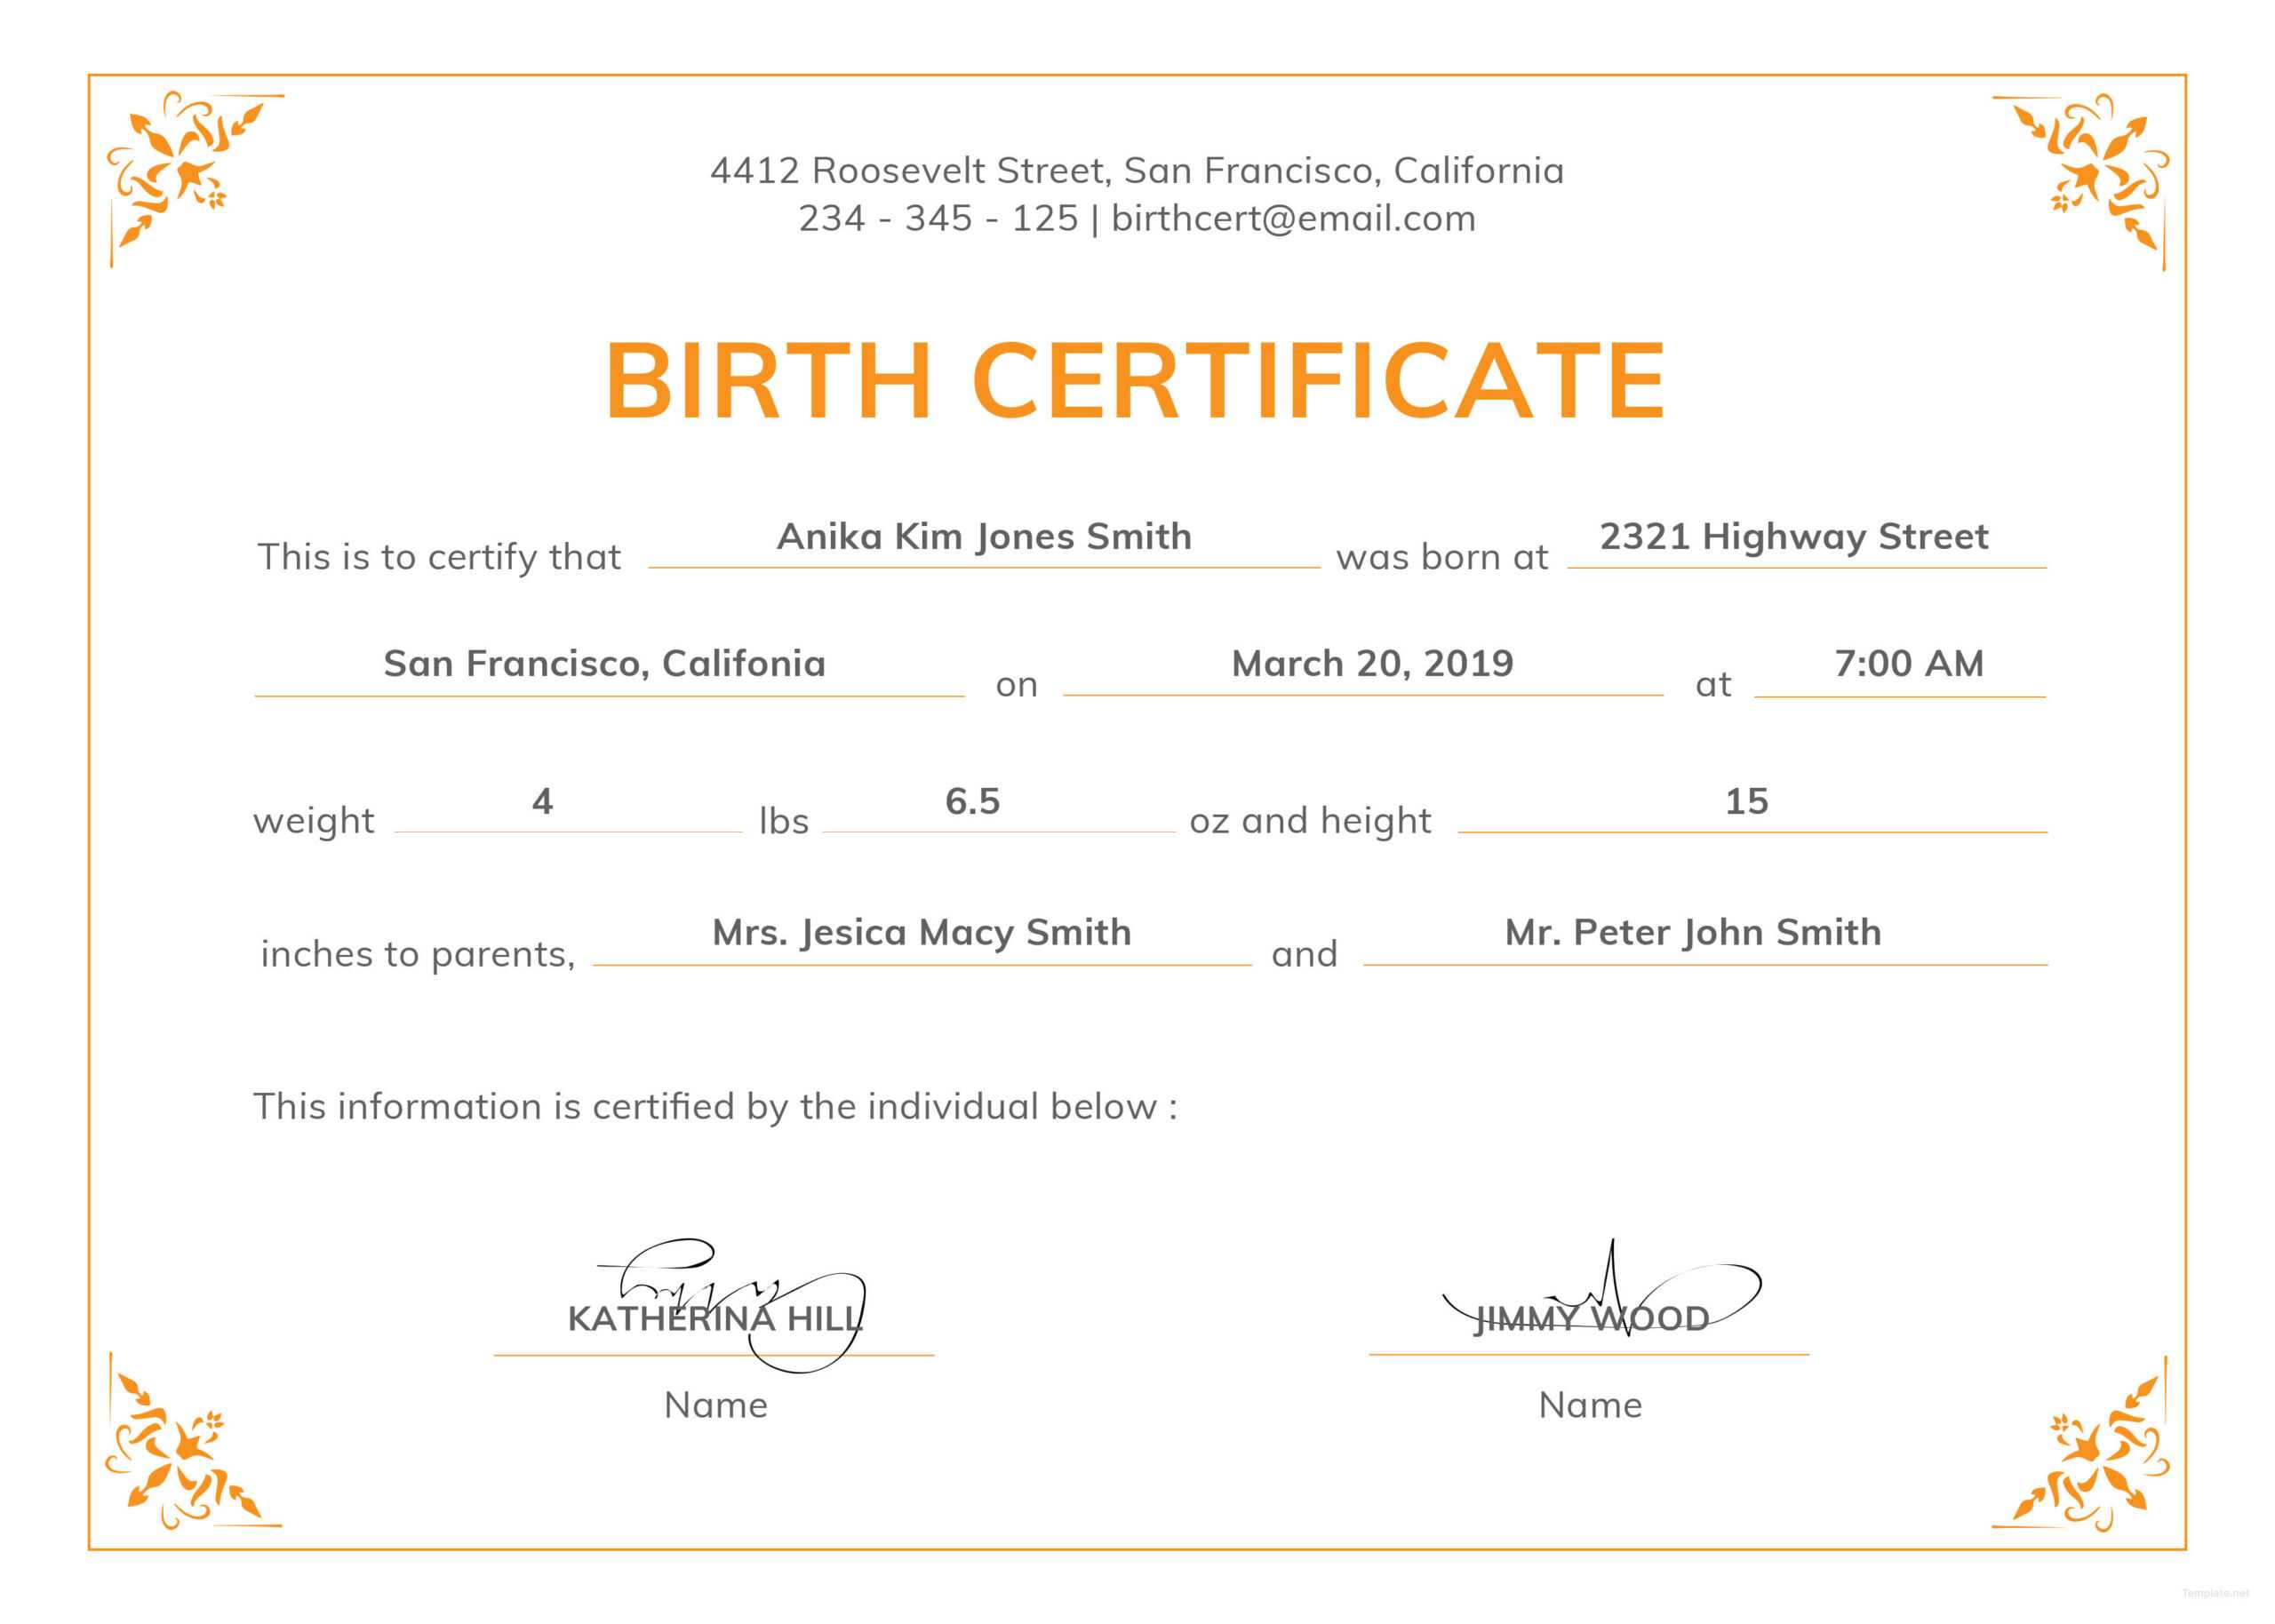 Can Make A Delivery Certificate Crucial | Gift Certificate Regarding Official Birth Certificate Template